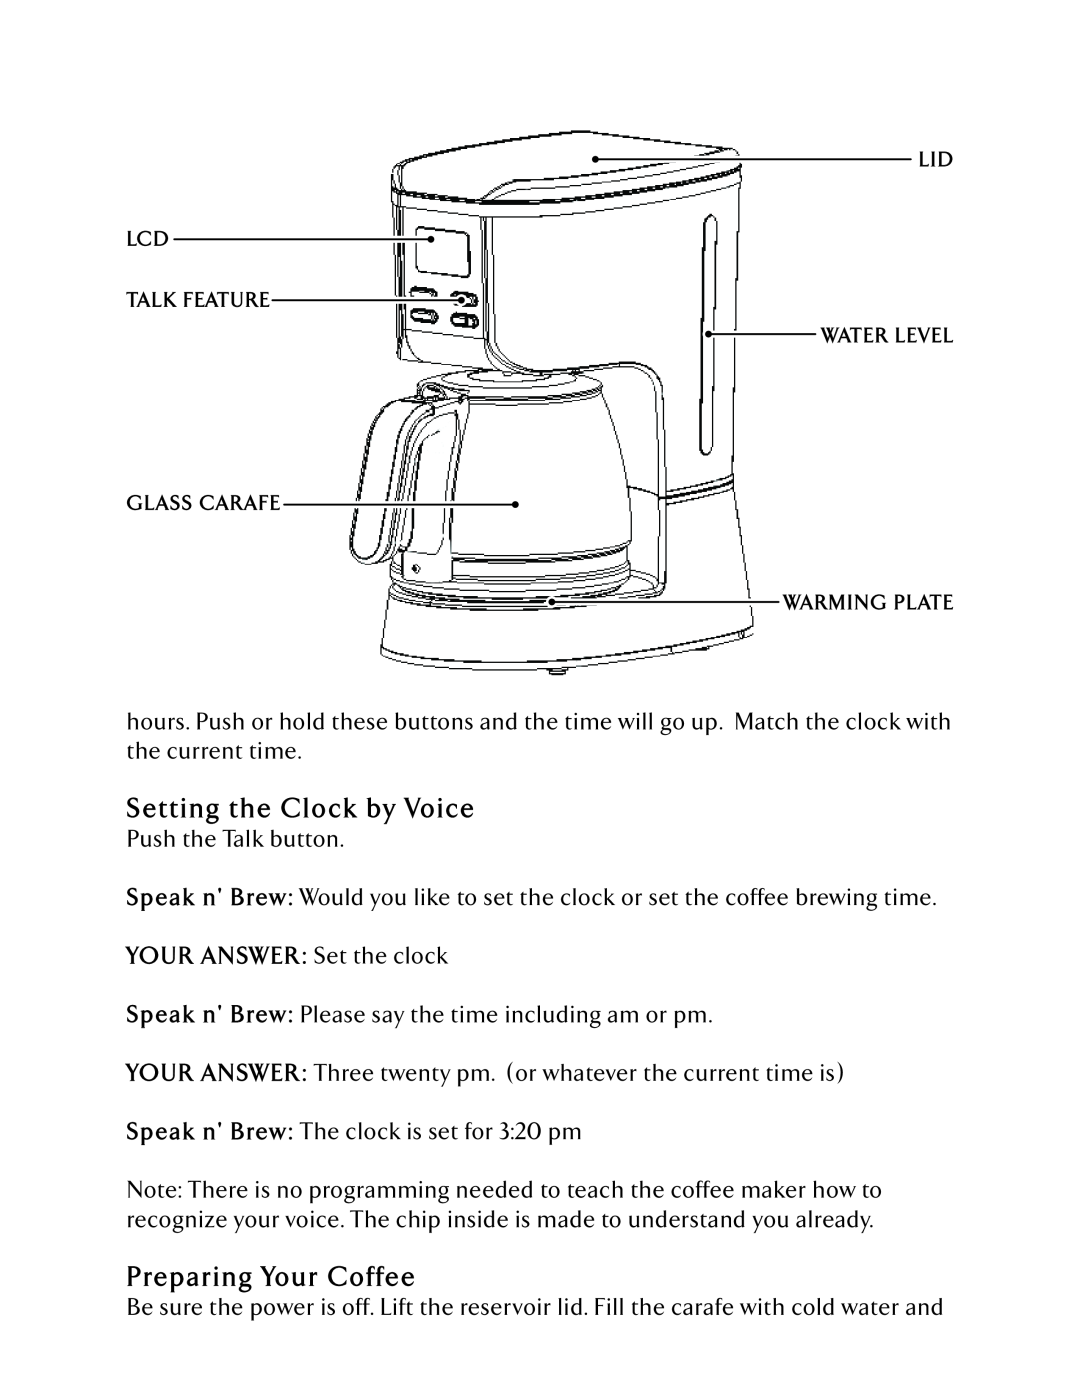 Epoca SAB-3001 user manual S etting the Clock by Voice, Preparing Your Coffee 